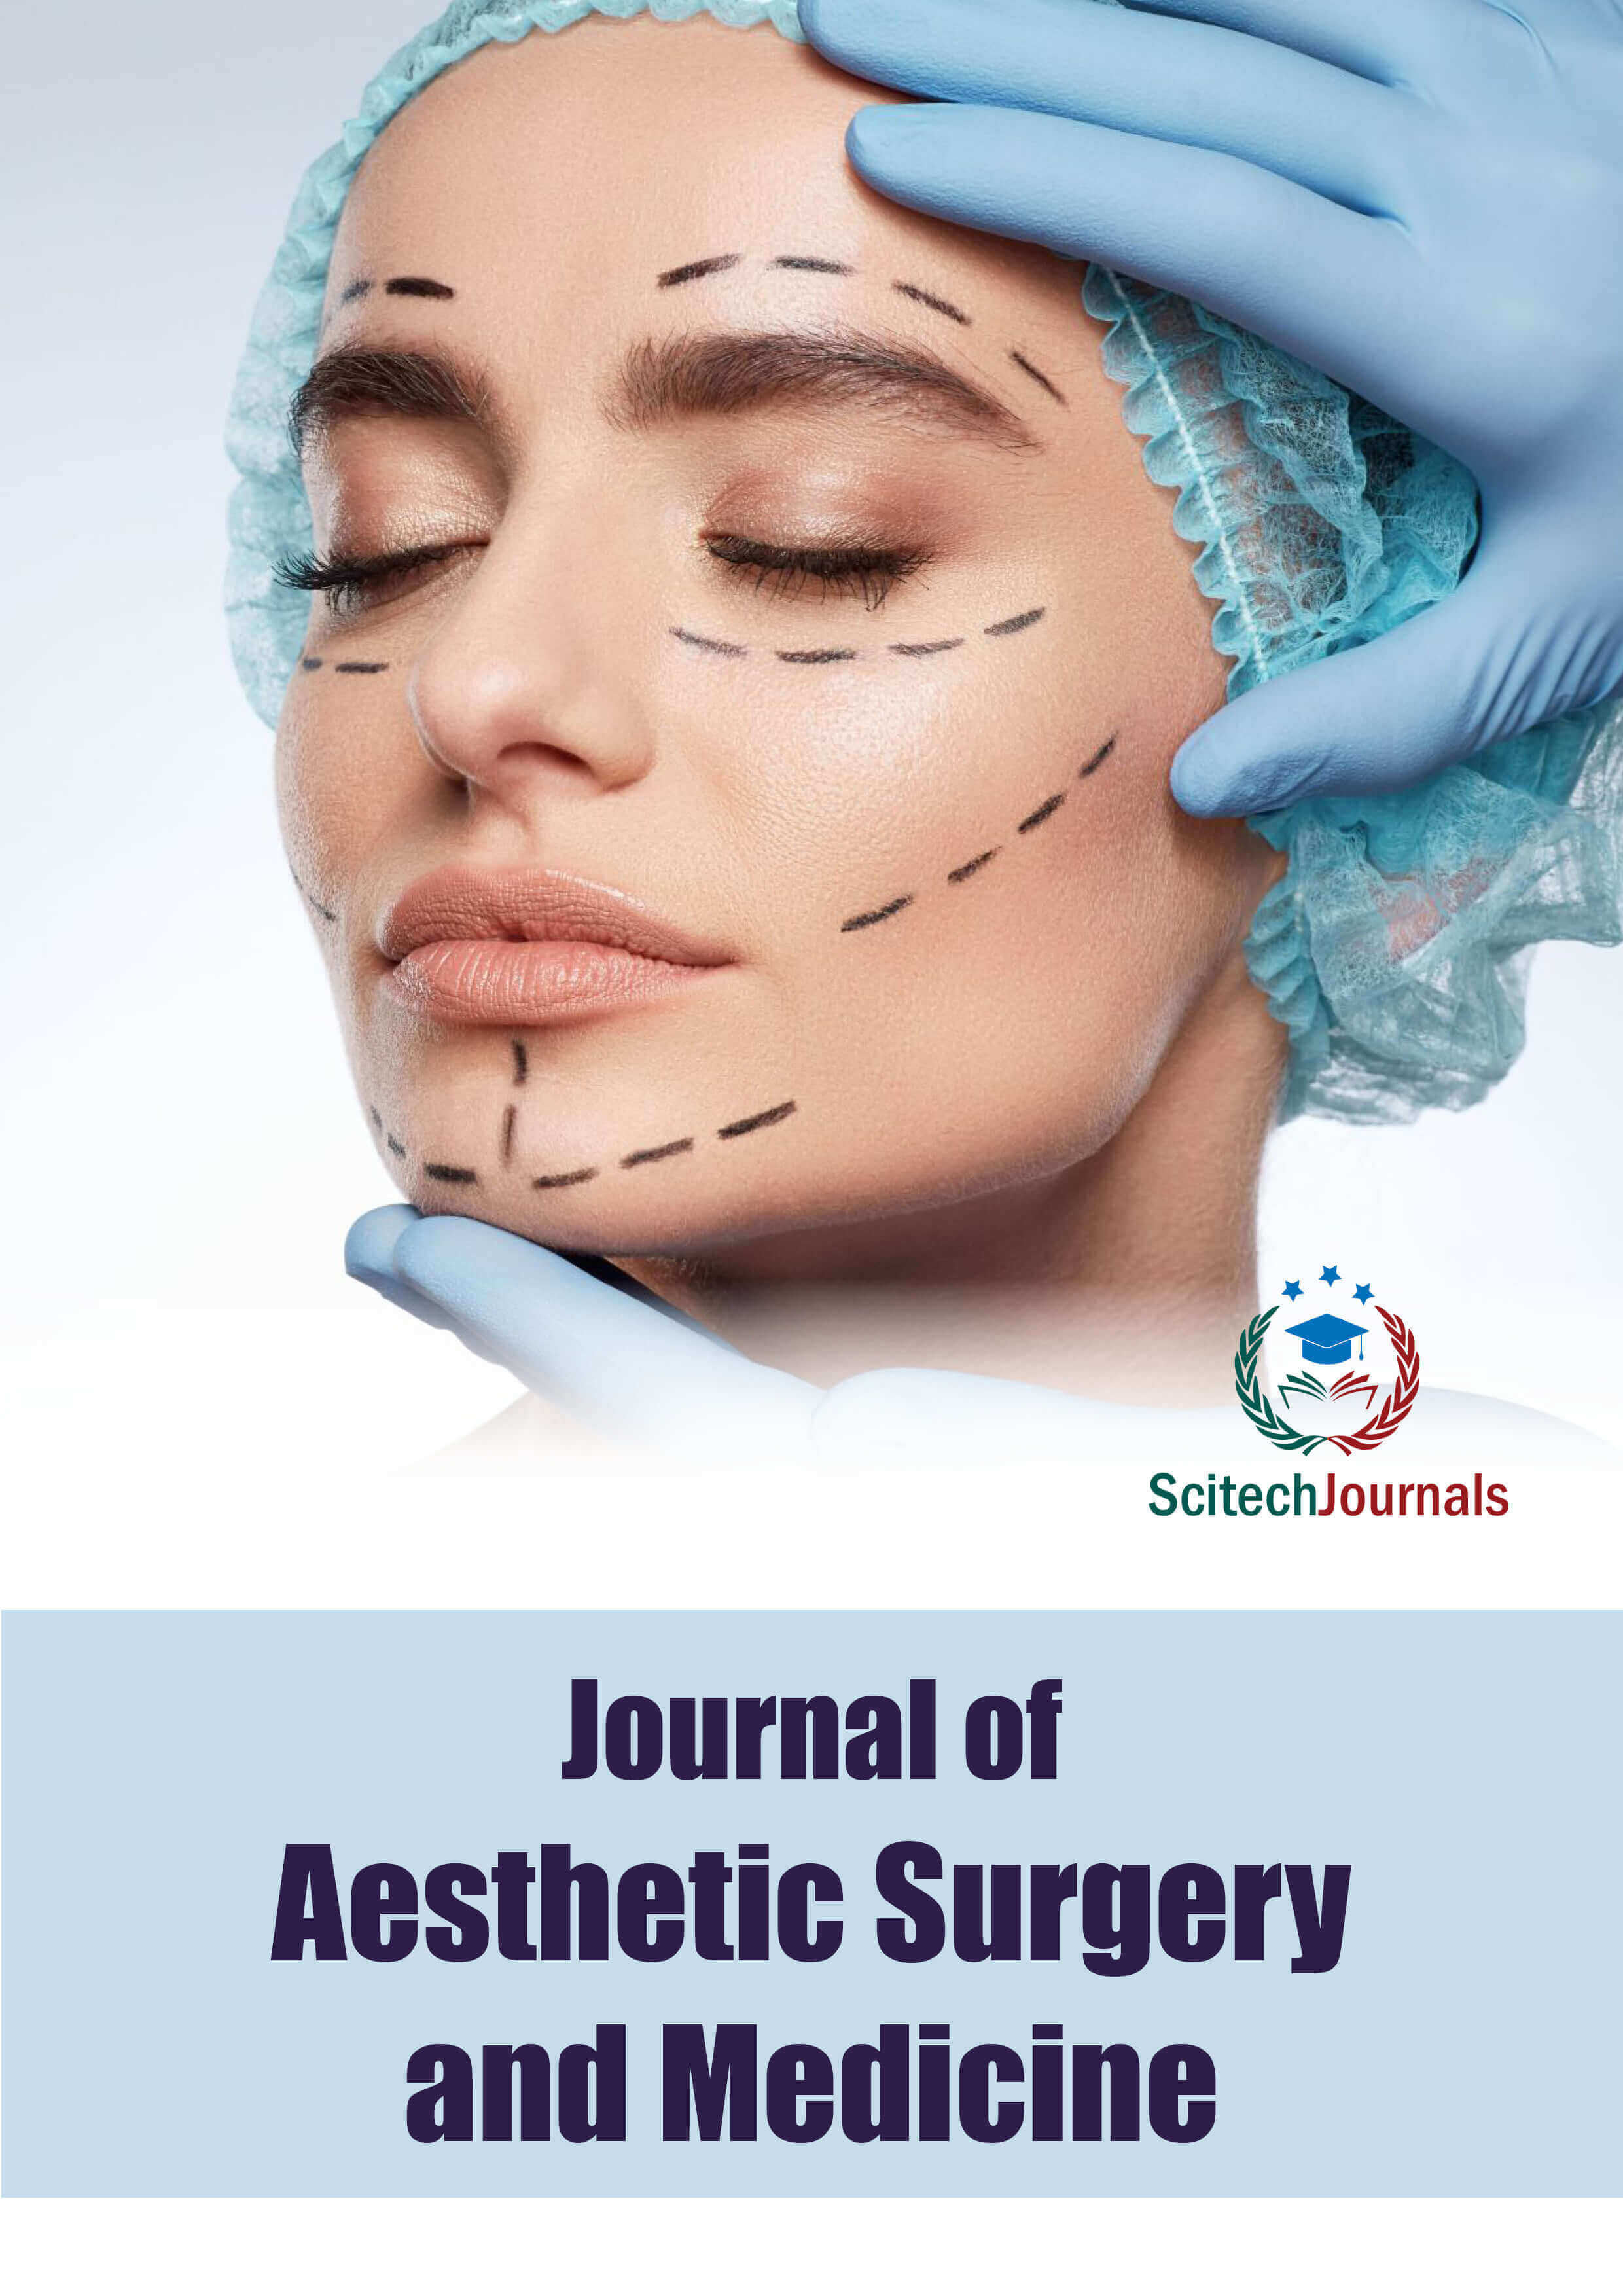 Journal of Aesthetic Surgery and Medicine